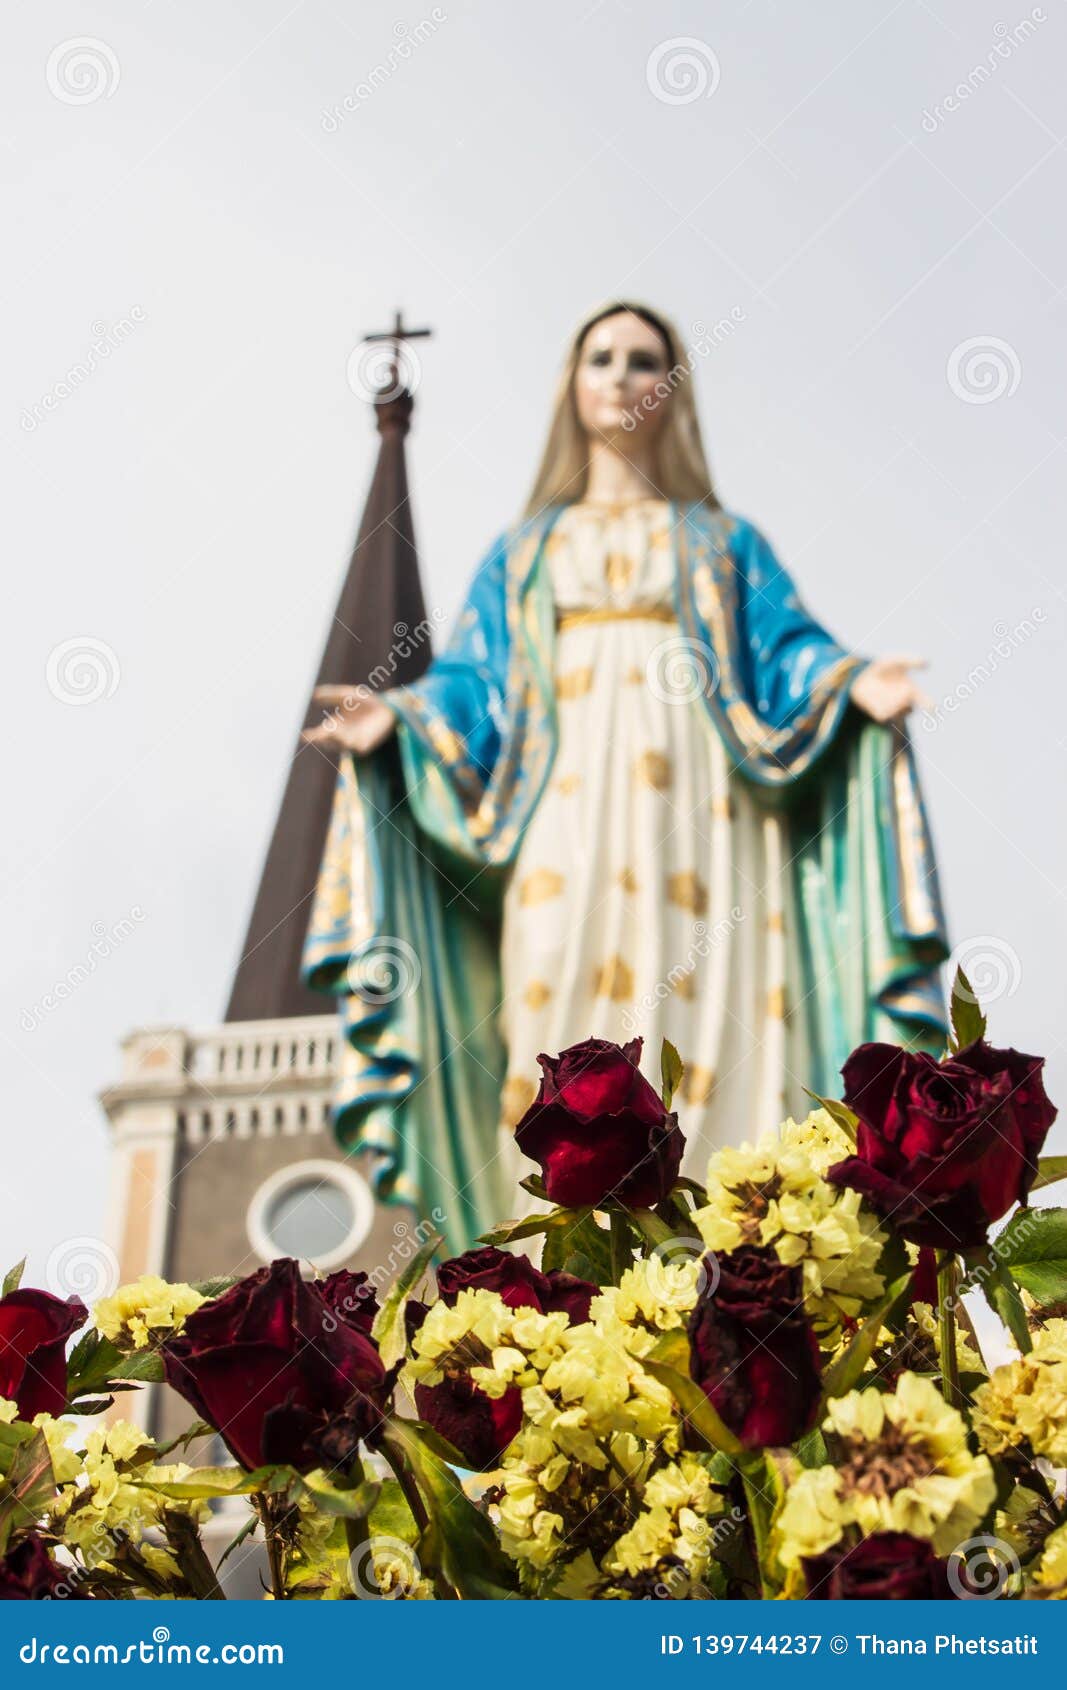 The Blessed Virgin Mary Statue and Flower of Worship Stock Image ...